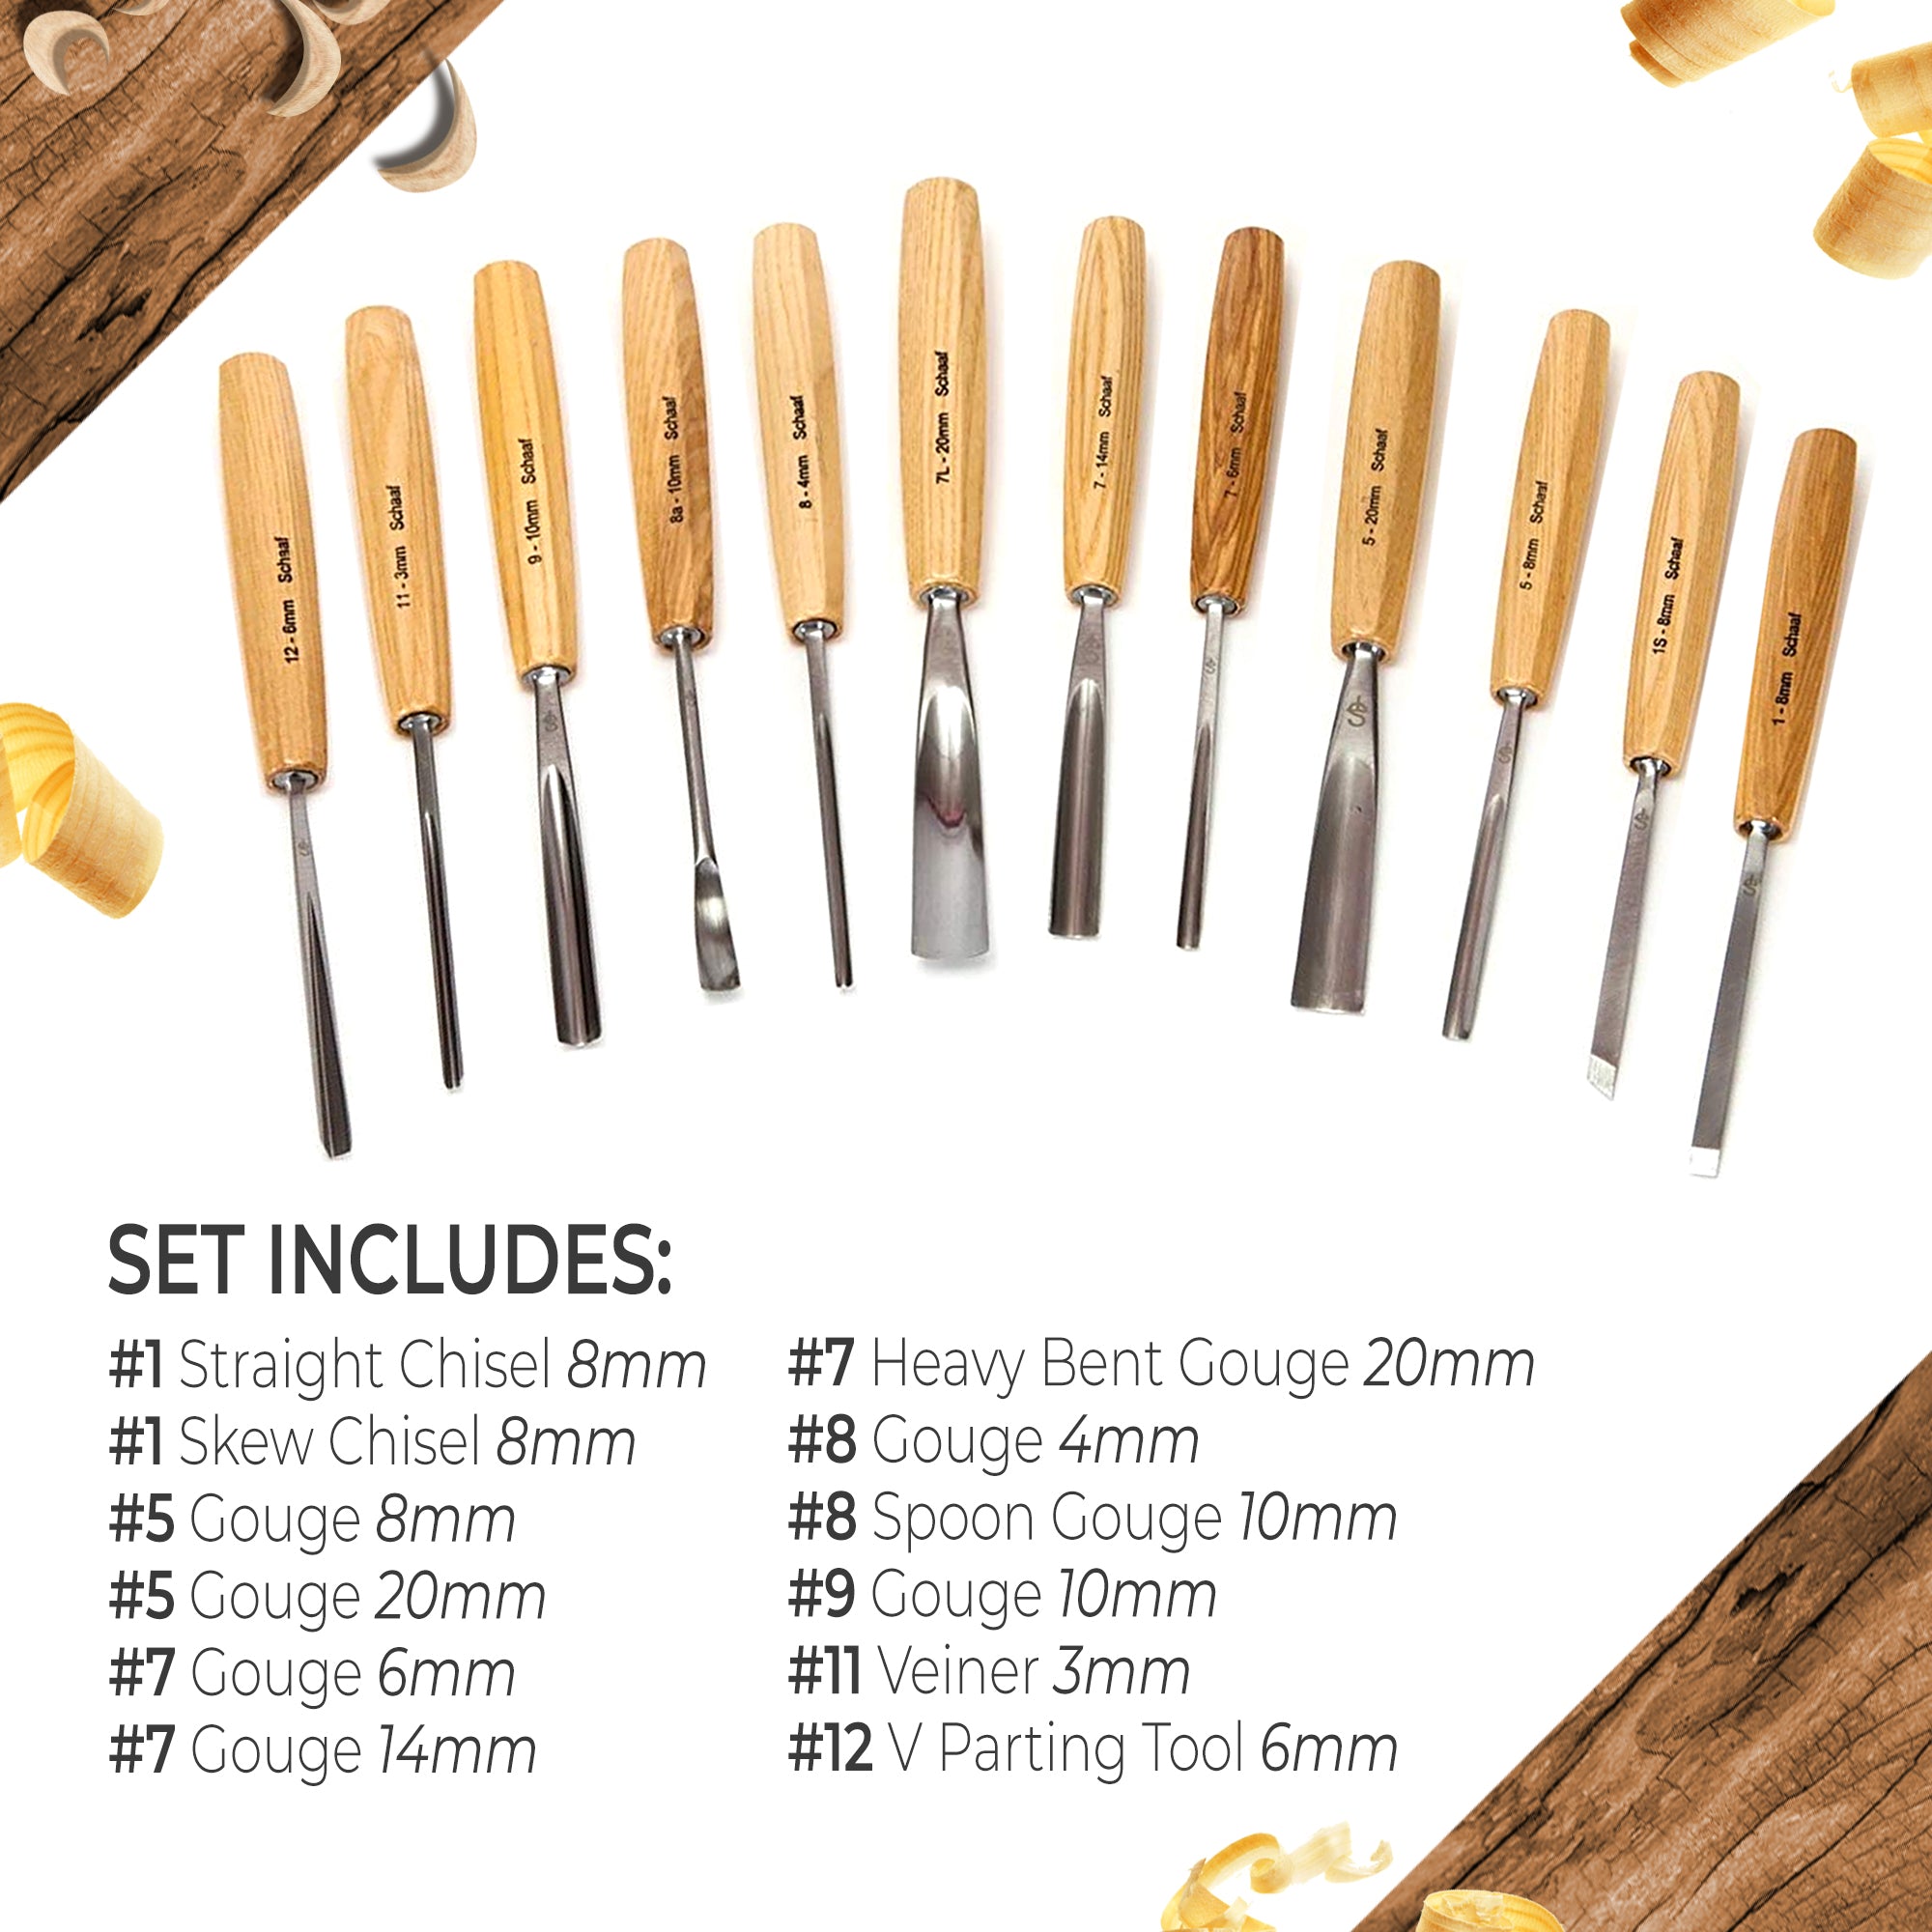 5 Best Wood Carving Tools Sets for Beginners